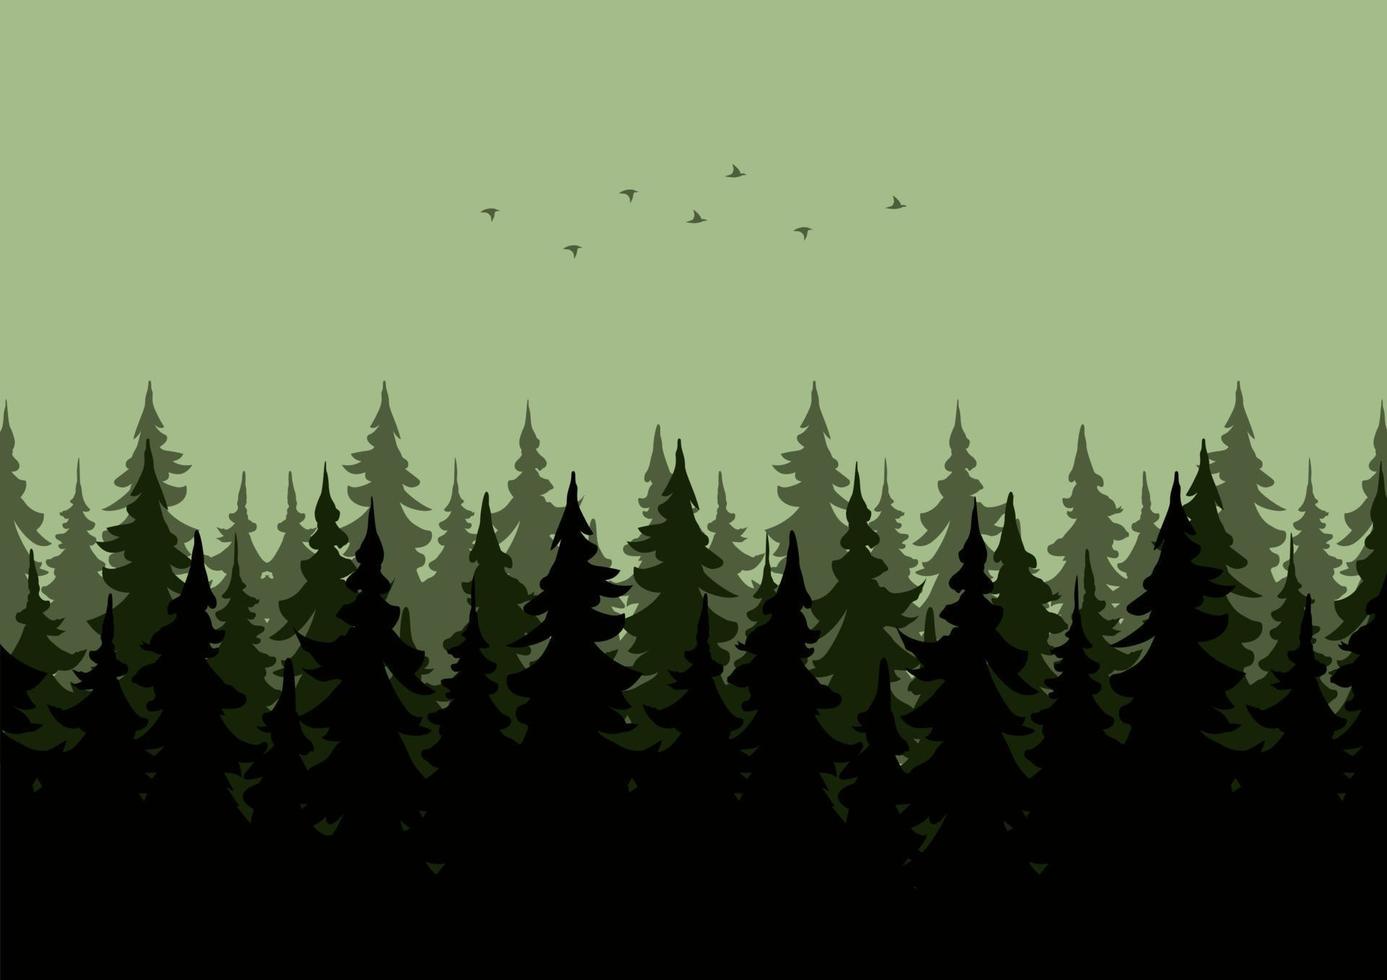 forests landscape vector illustration with a green silhouette